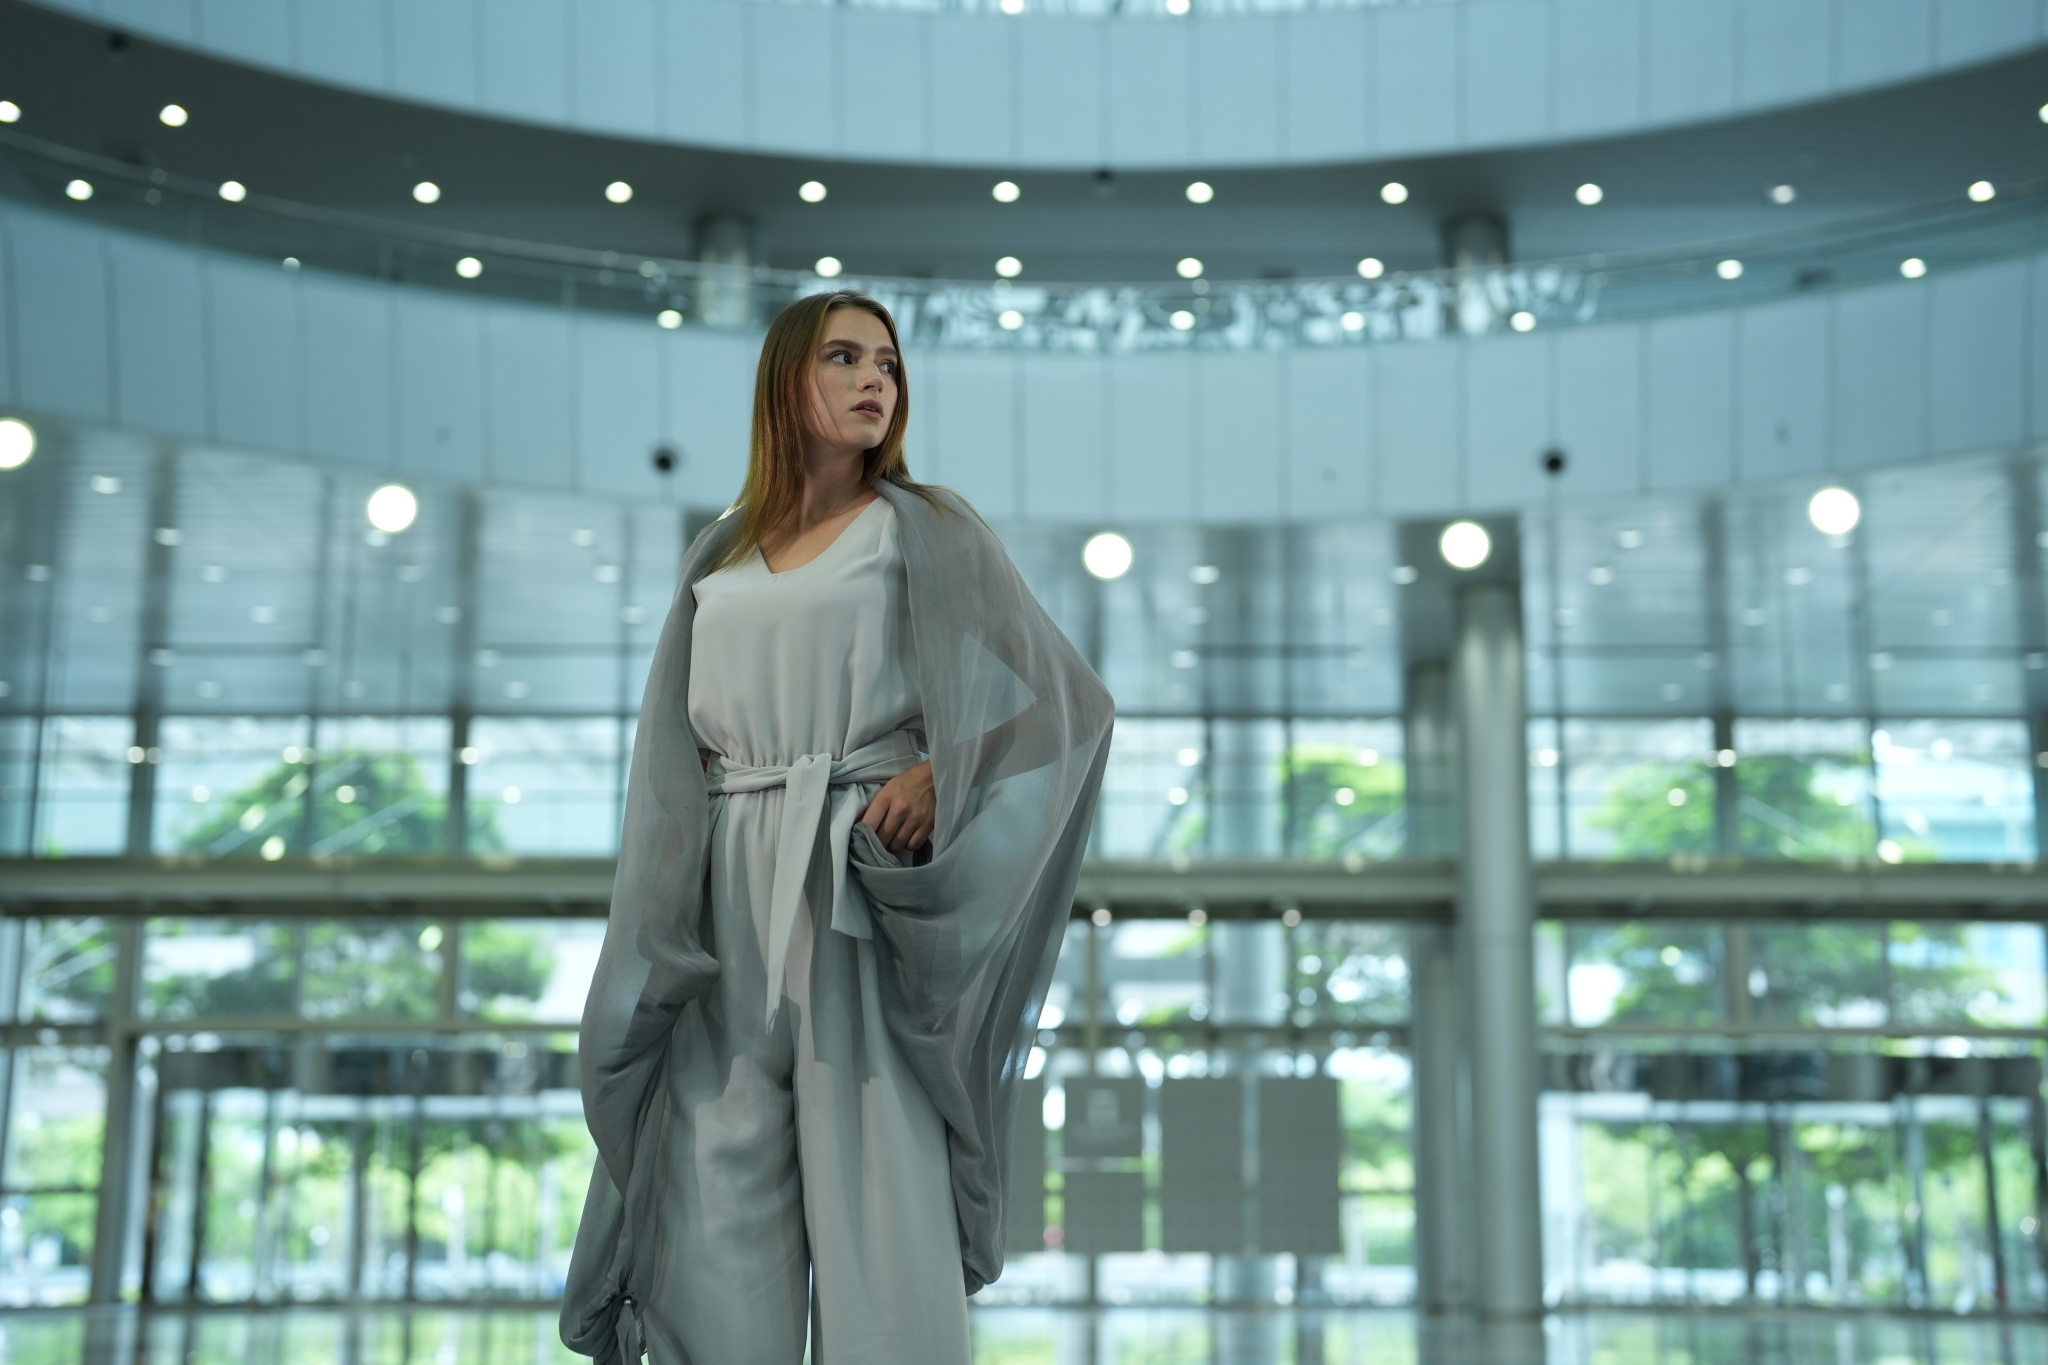 Female model in a curved room with glass walls